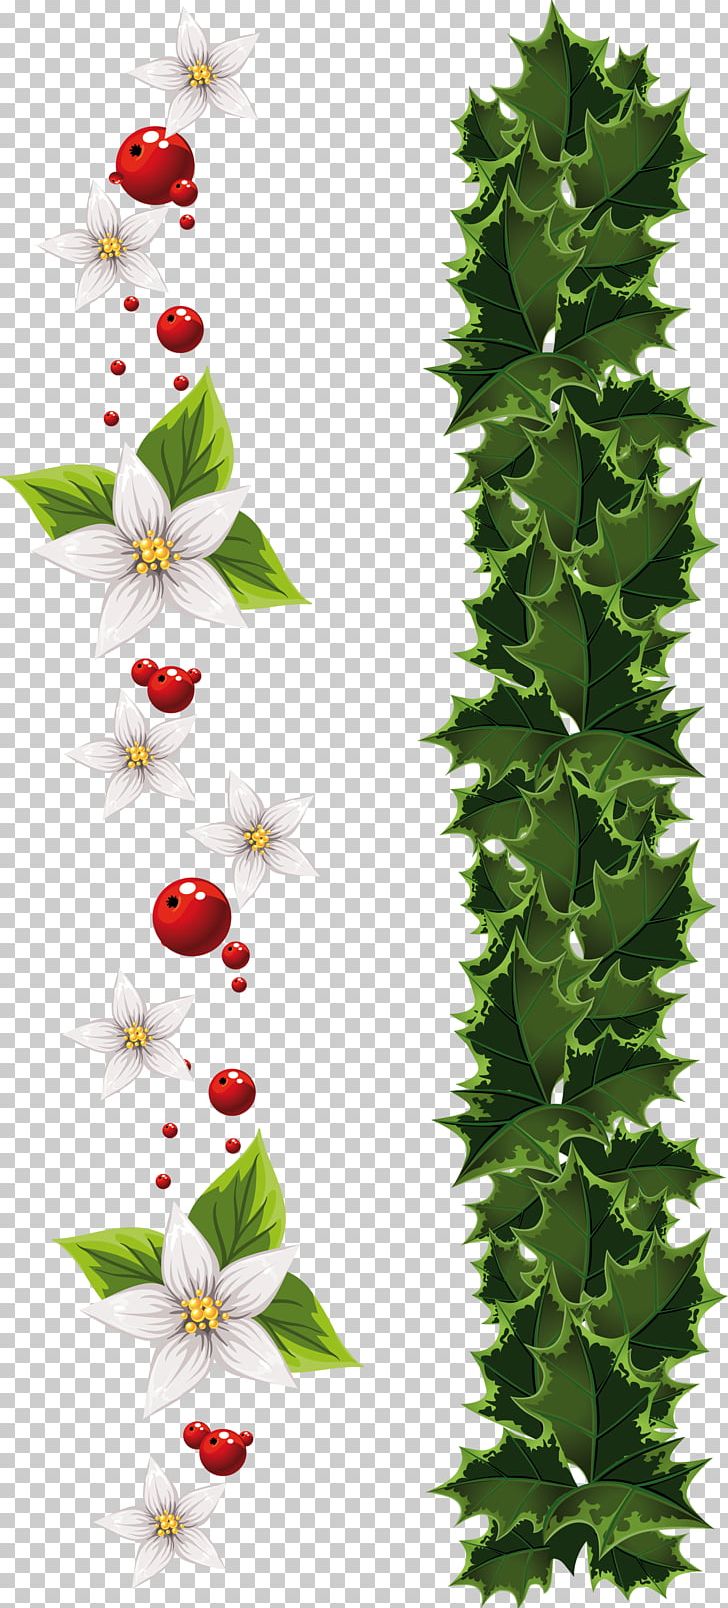 Garland Christmas Decoration Wreath PNG, Clipart, Aquifoliaceae, Aquifoliales, Branch, Christmas, Christmas Ornament Free PNG Download